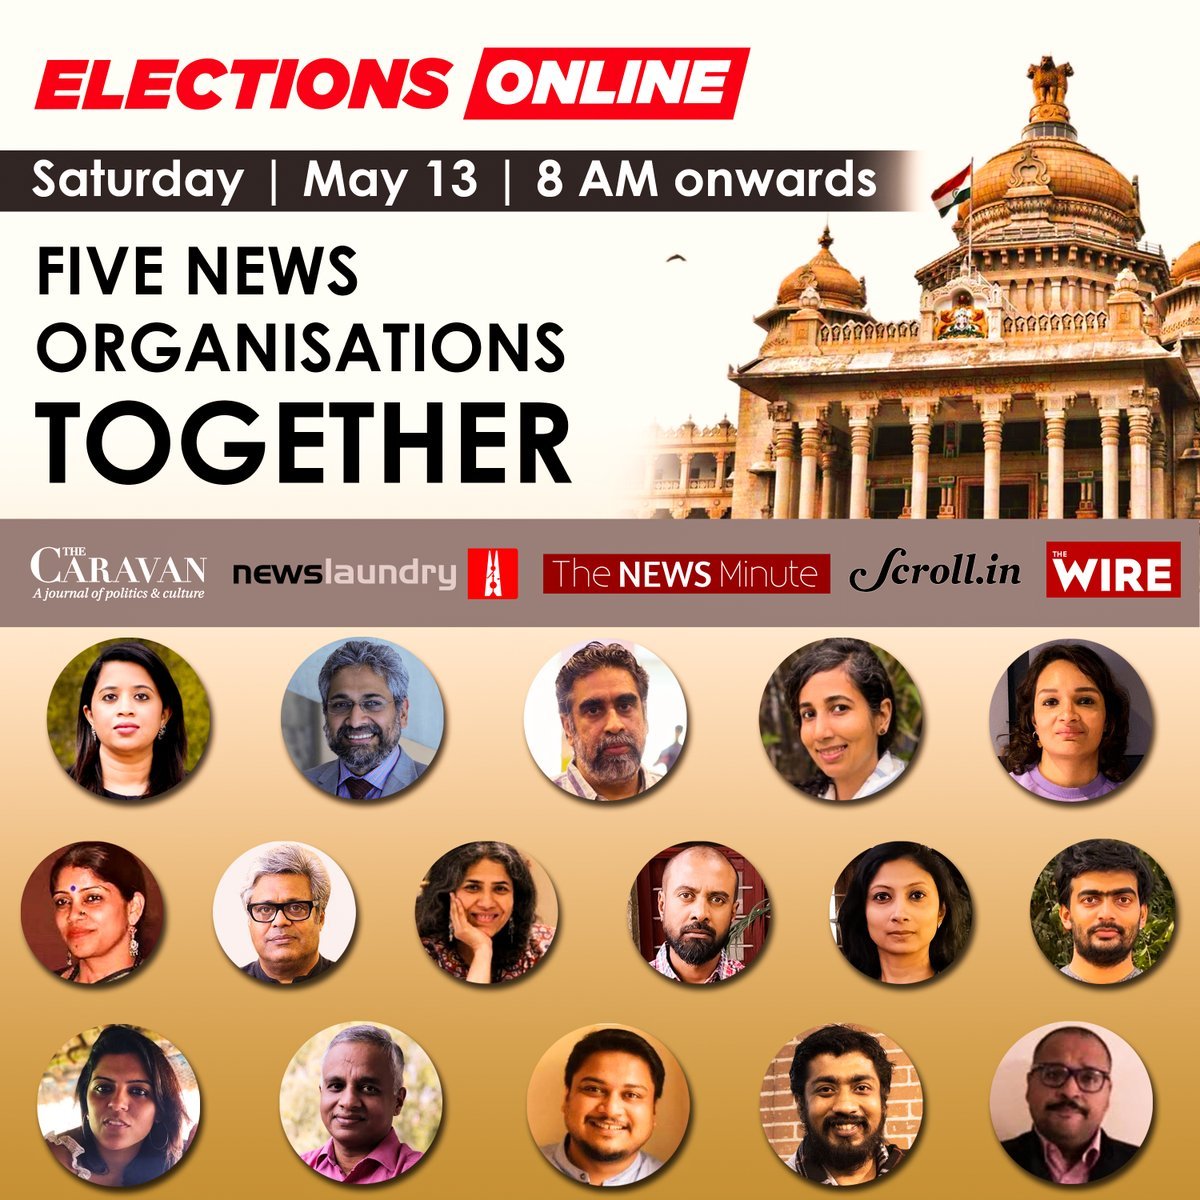 Five independent media organisations are coming together to give you a no-BS, nerdy #KarnatakaElectionResults programme. Starts 8 am on all five YouTube channels.